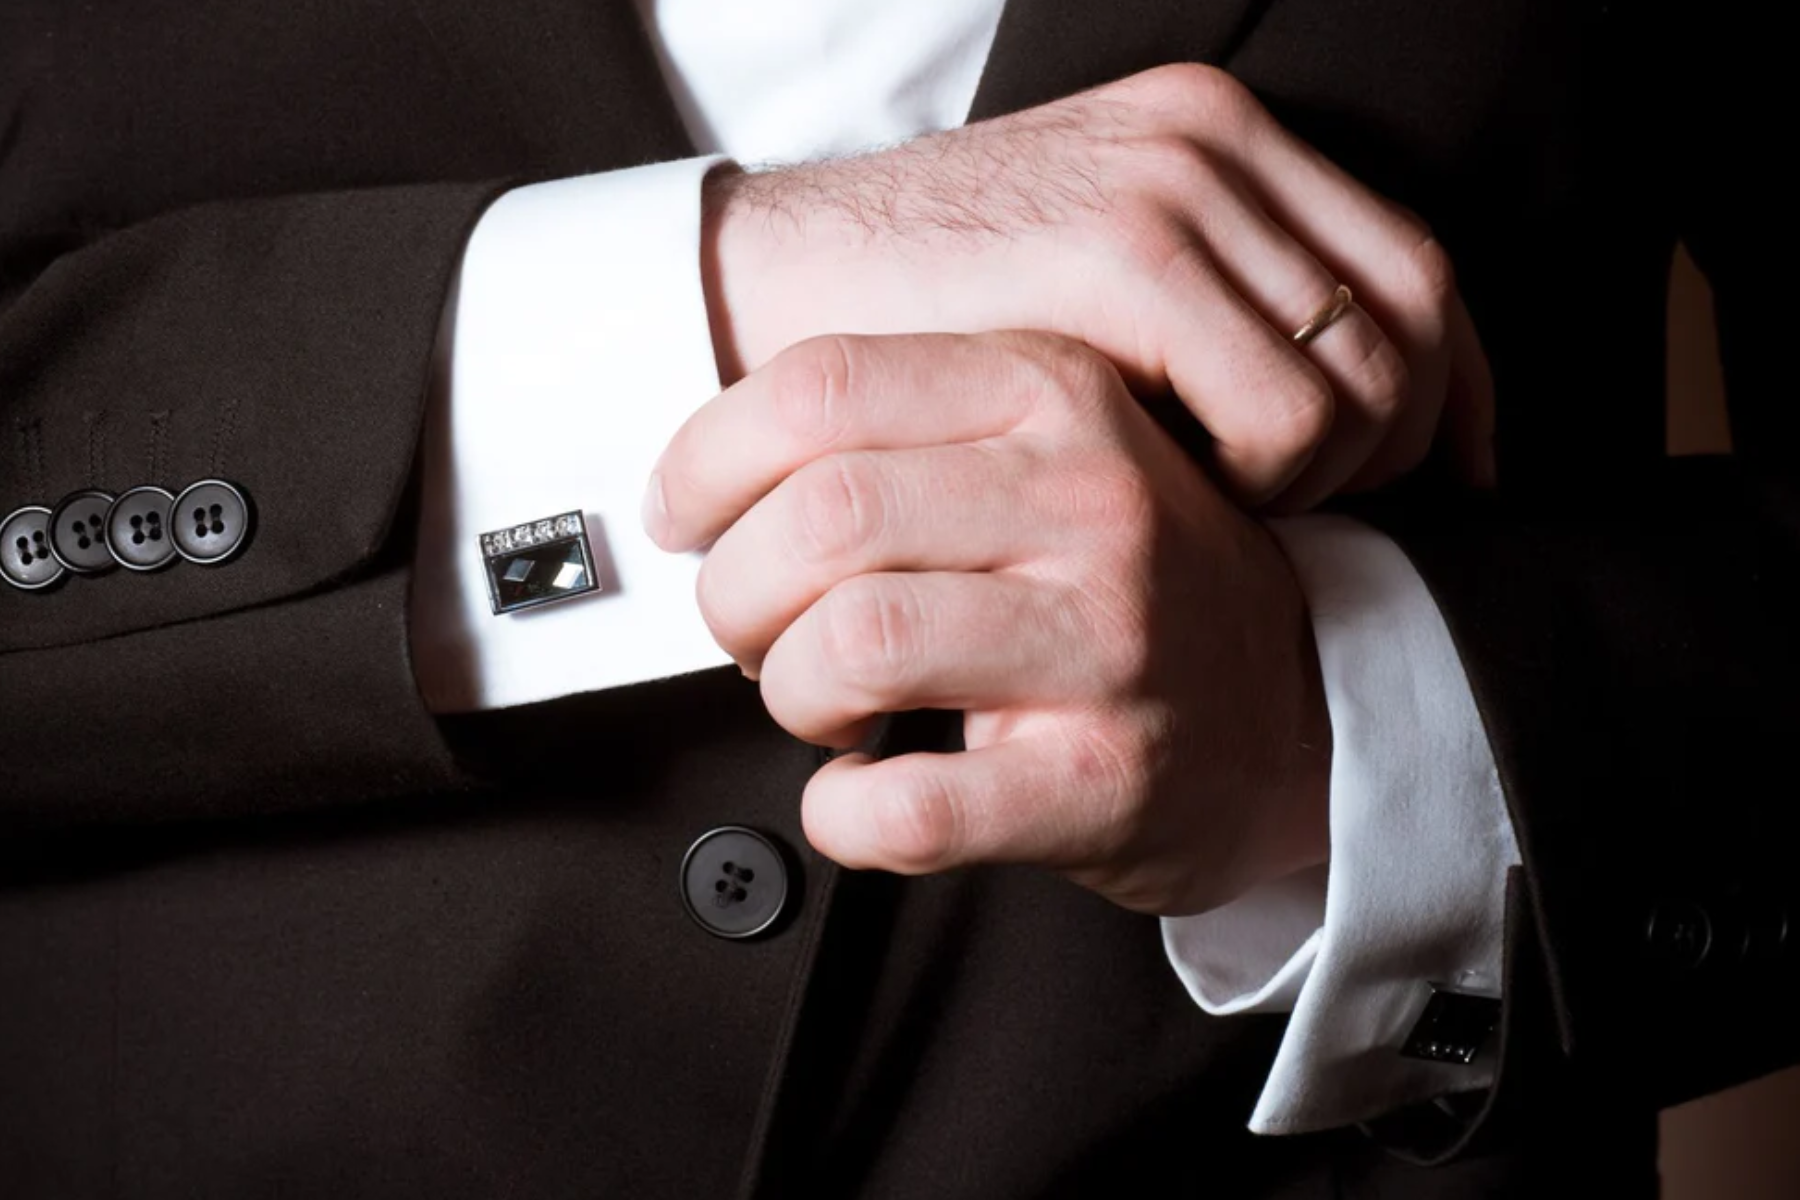 A man wearing a formal suit with formal cufflinks